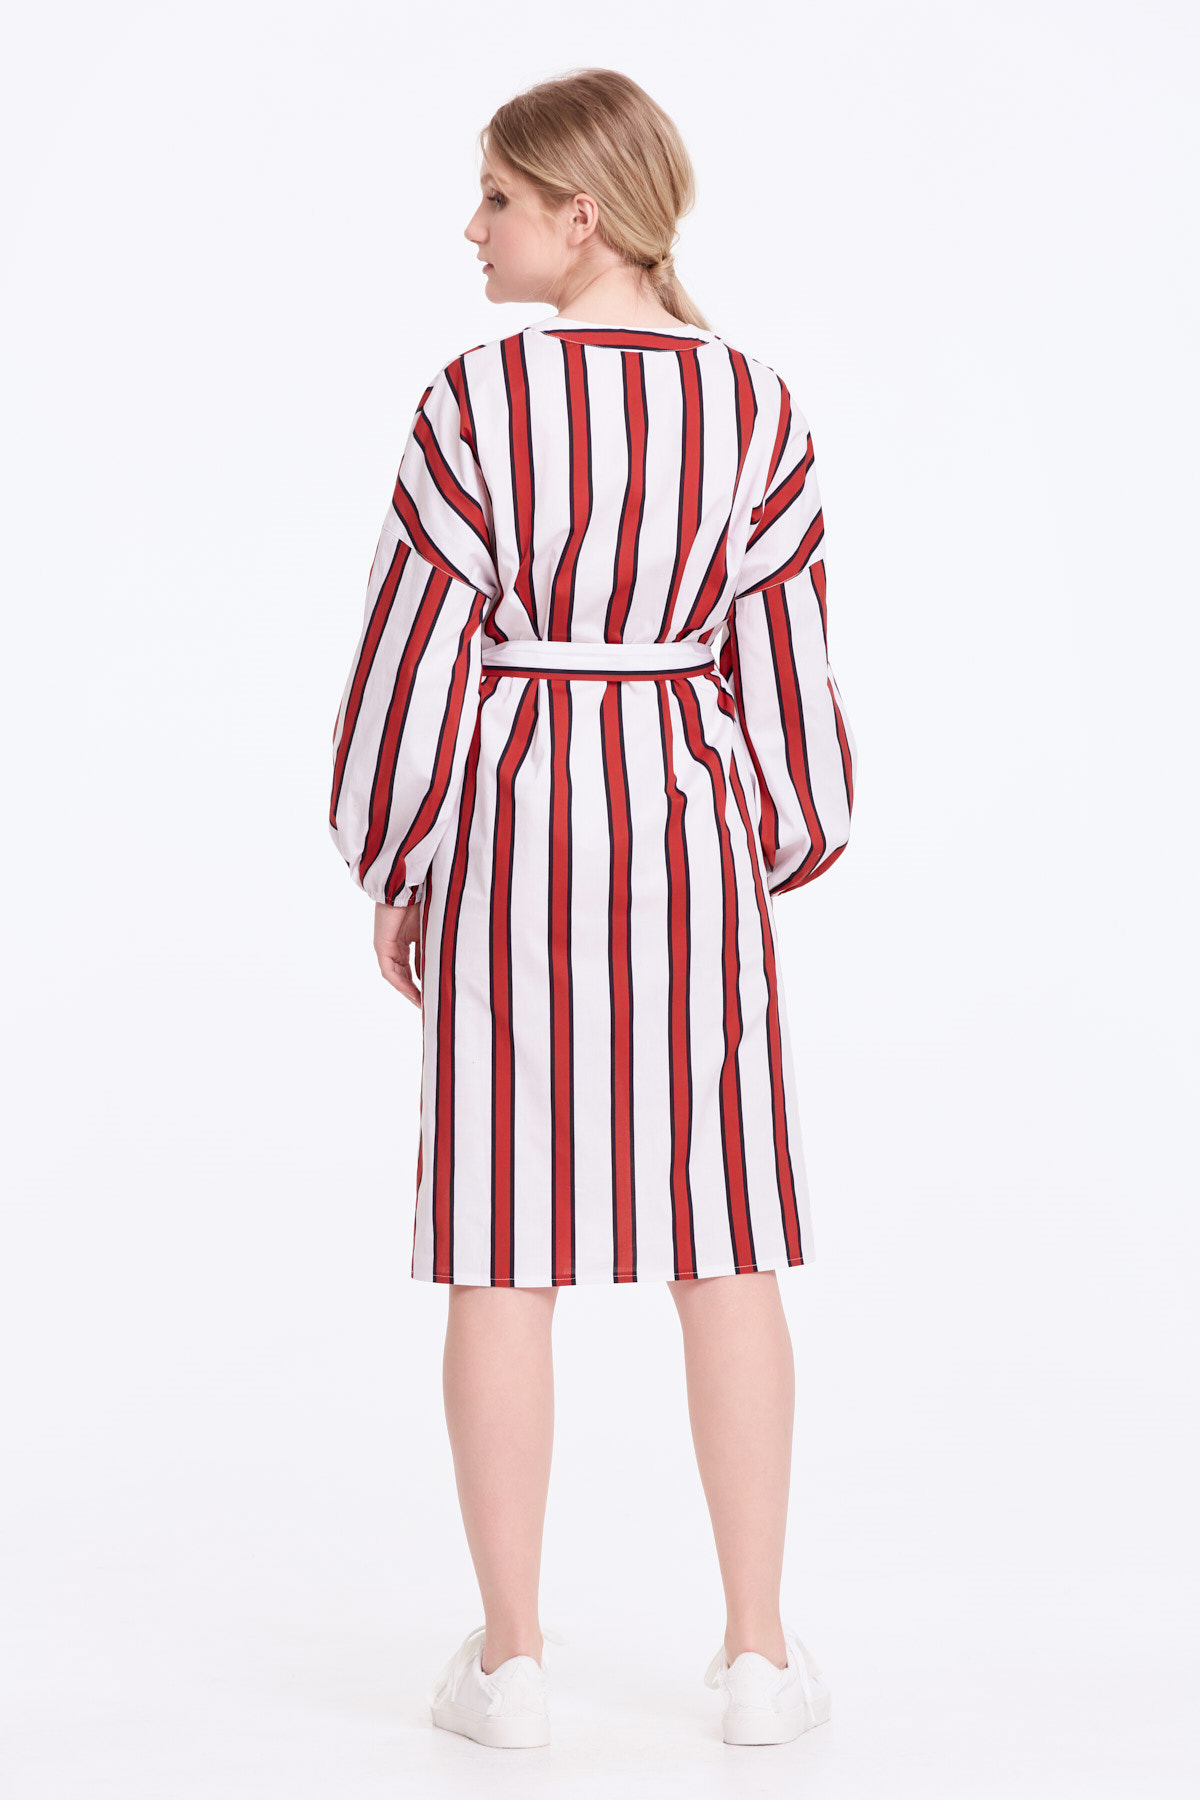 White dress with red and black stripes, photo 6